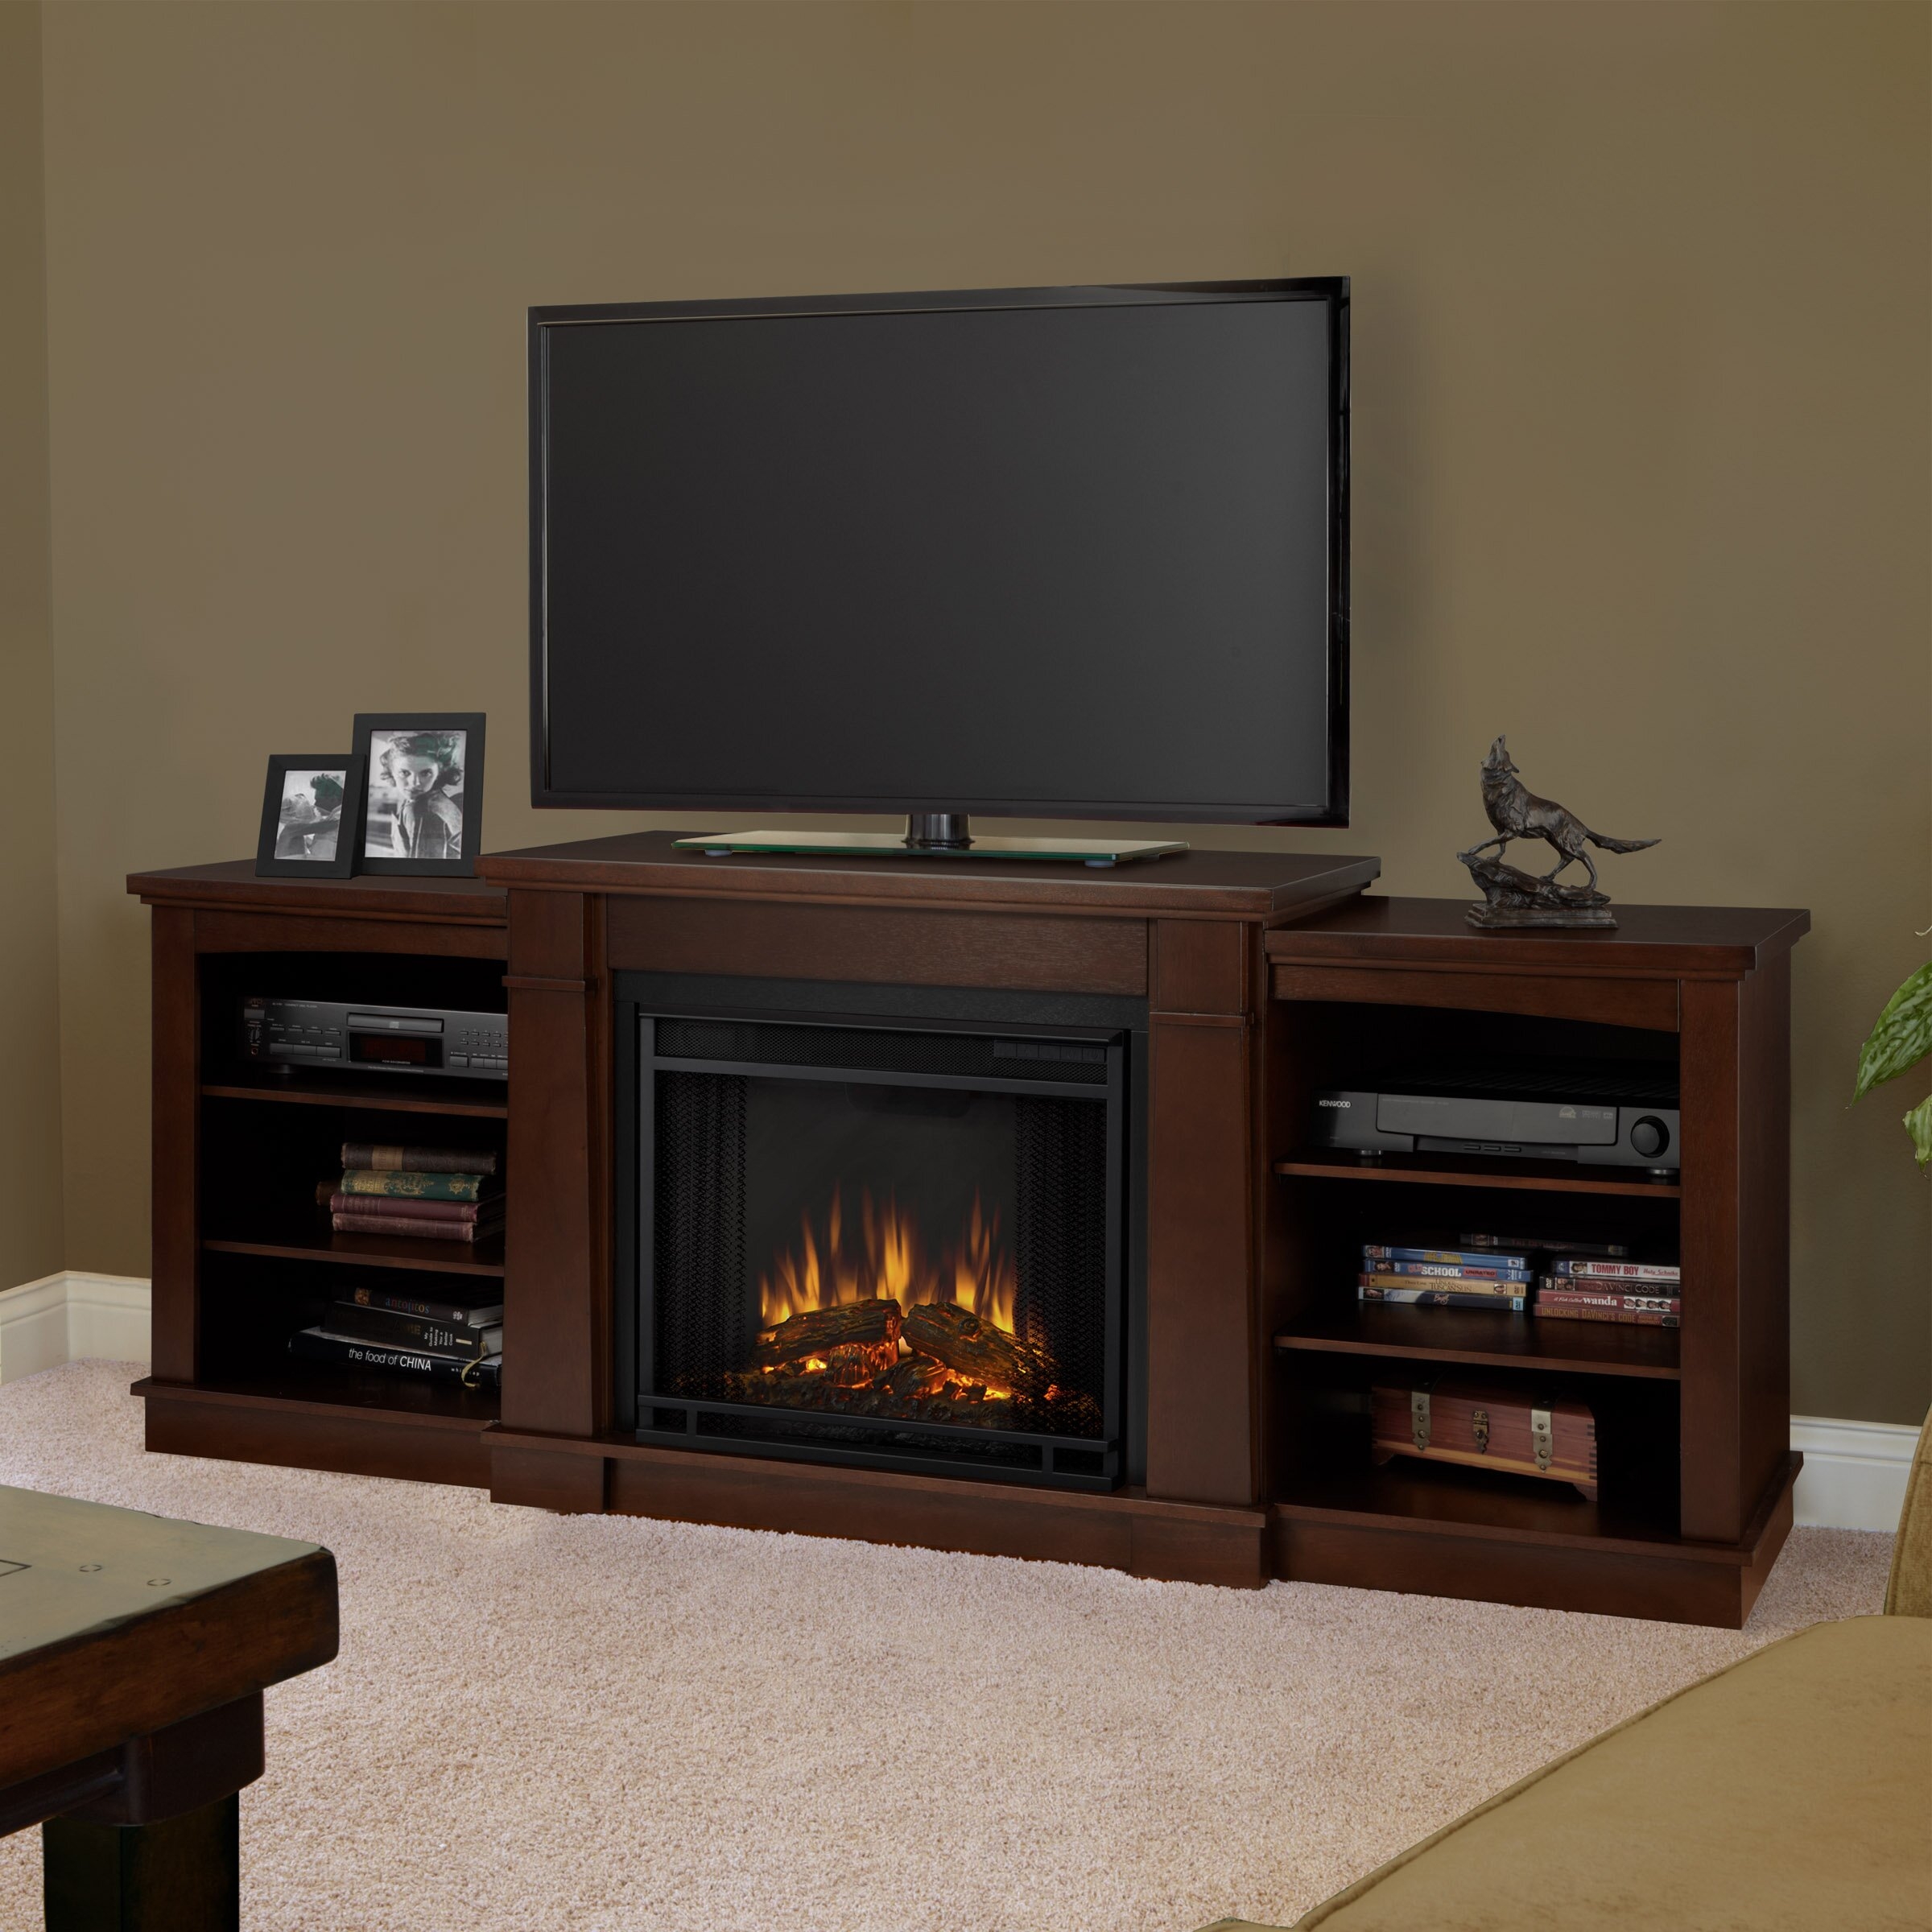 Tv Stand With Fireplace Visualhunt, Tv Stand Fireplace Wayfair